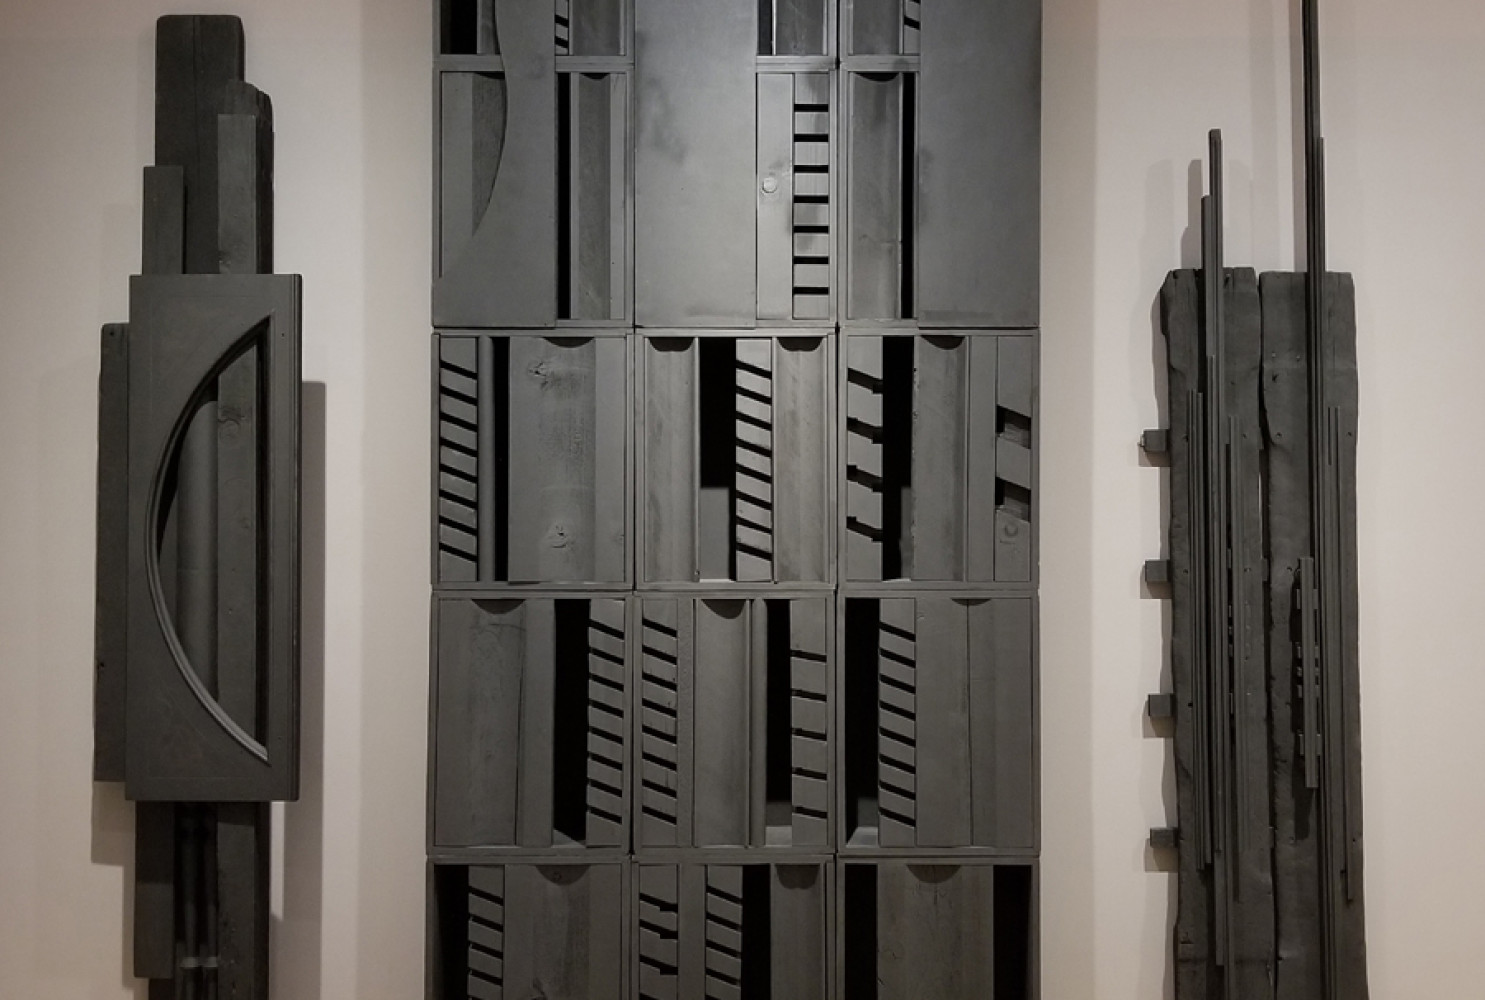 Louise Nevelson, Endless Column, 1969-1985, Painted wood sculpture, Collection of the Farnsworth Art Museum, Bequest of Nathan Berliawsky, 1980.35.30